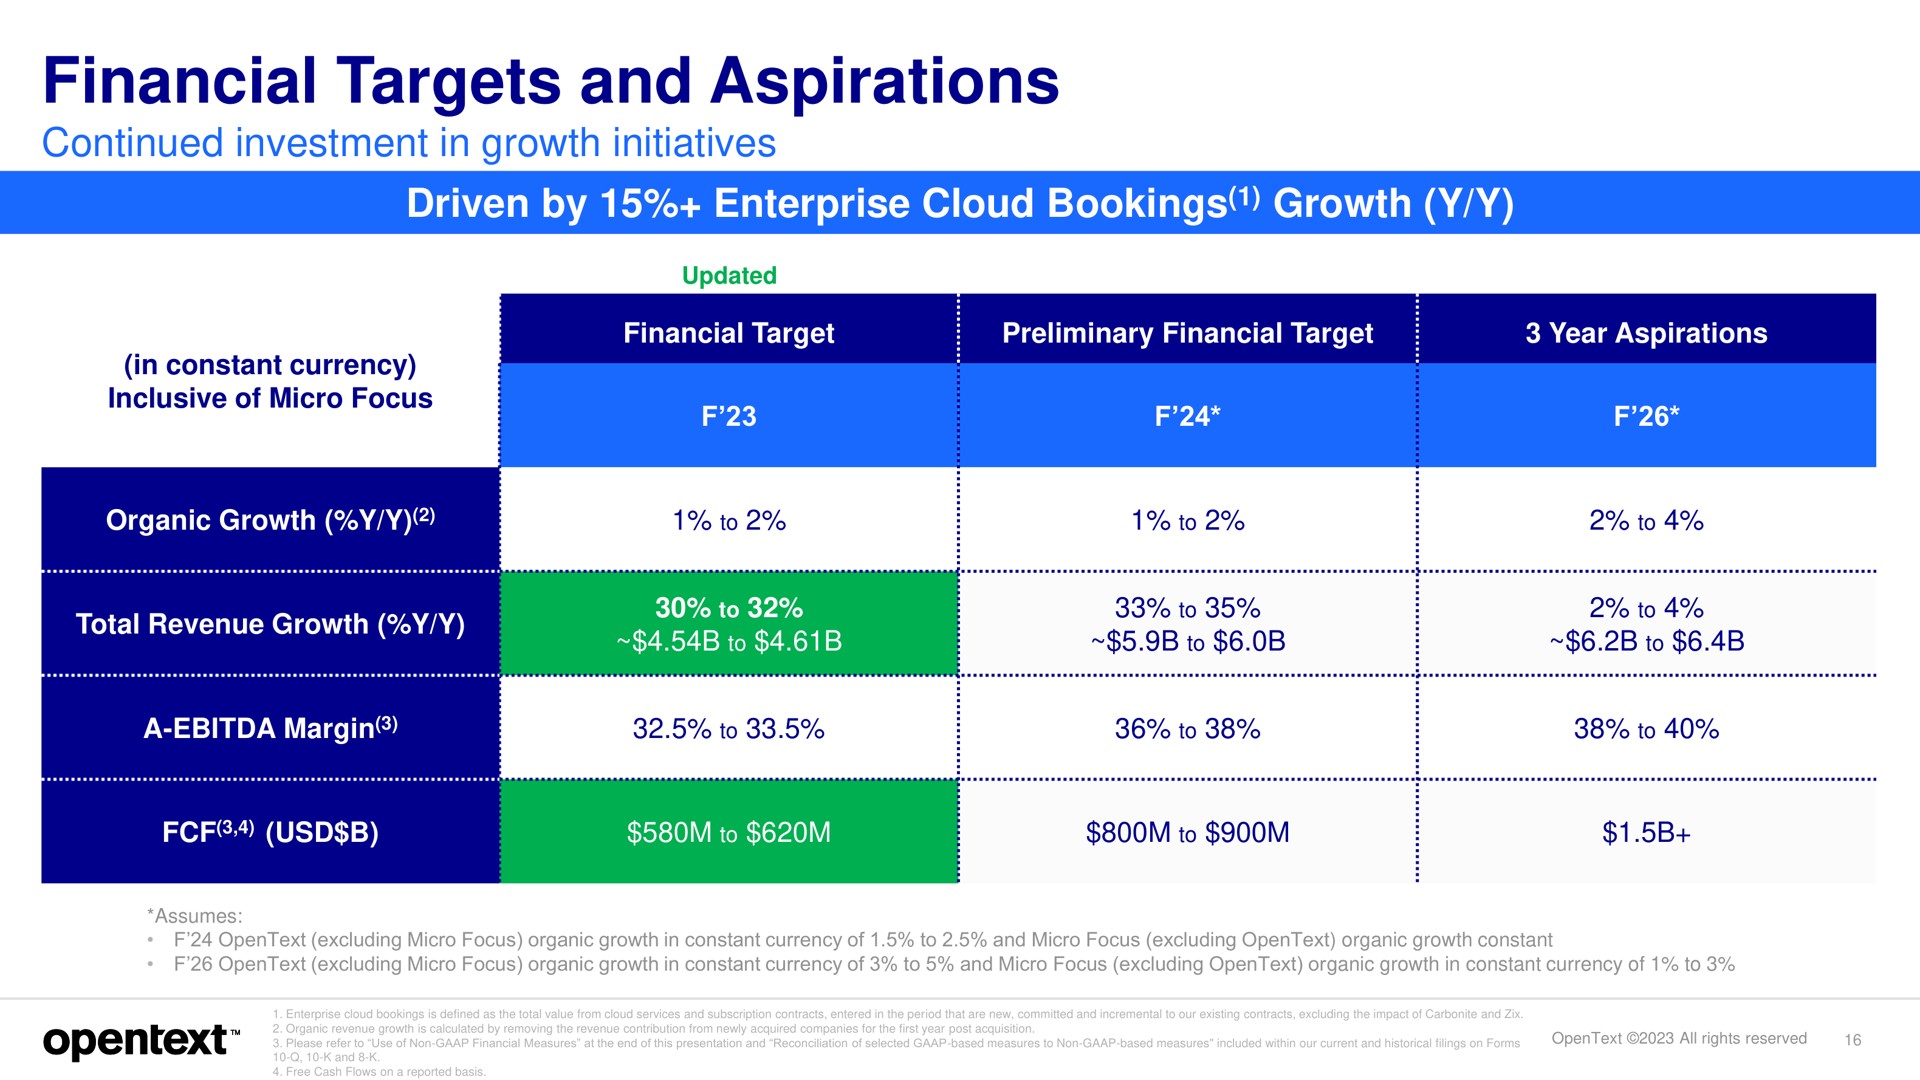 financial targets and aspirations | OpenText